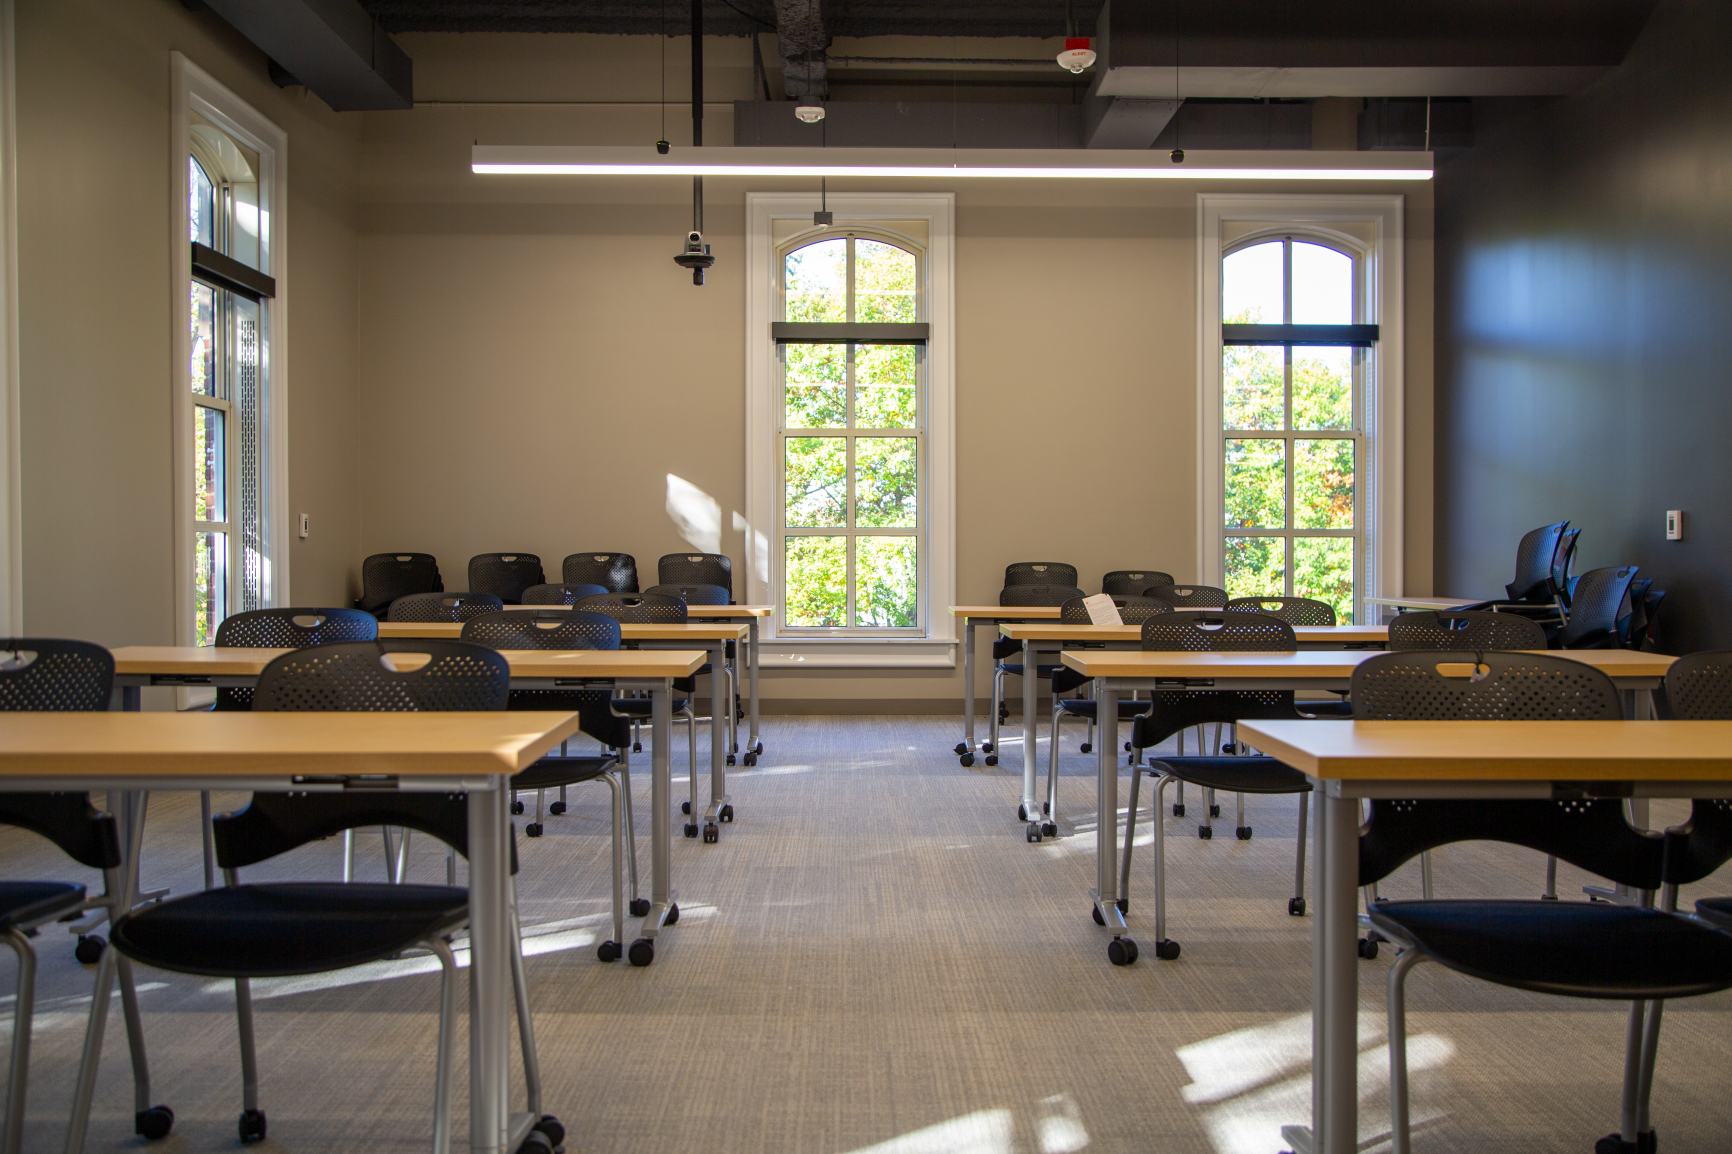 Caper chairs with mesh seating provide comfort for students in this flexible classroom space.